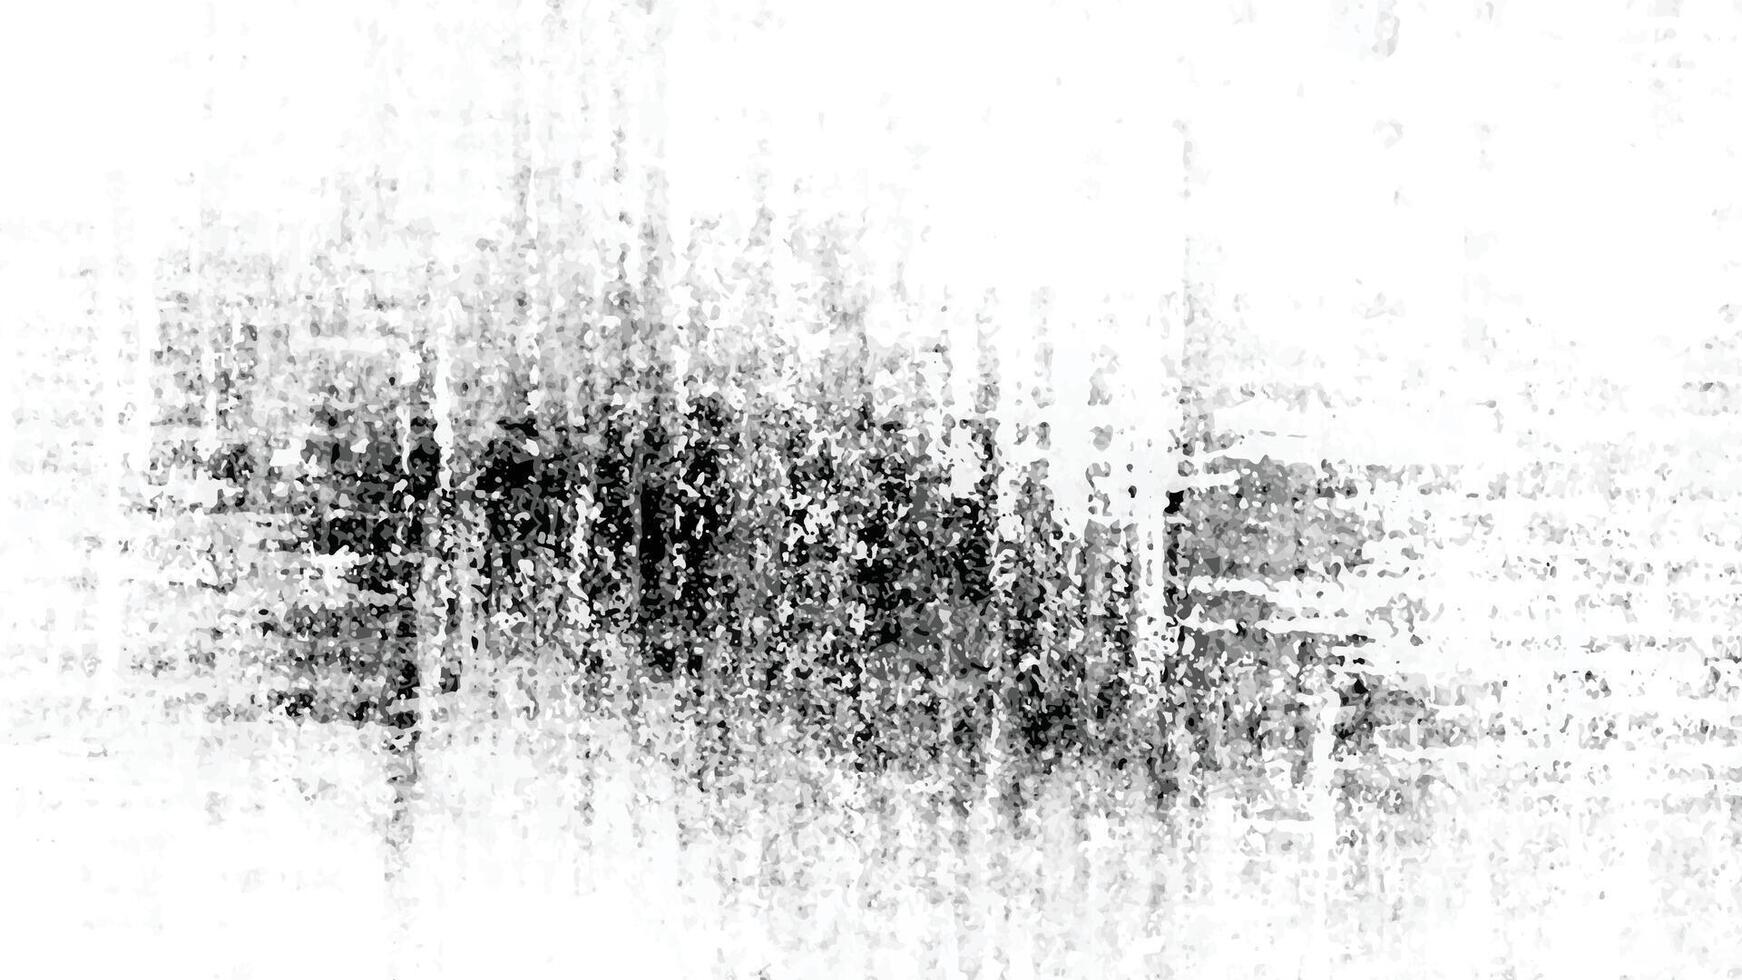 Dust Overlay Distress Grainy Grungy Effect. Sketch sand abstract to create distressed effect. Grunge brush texture white and black. vector